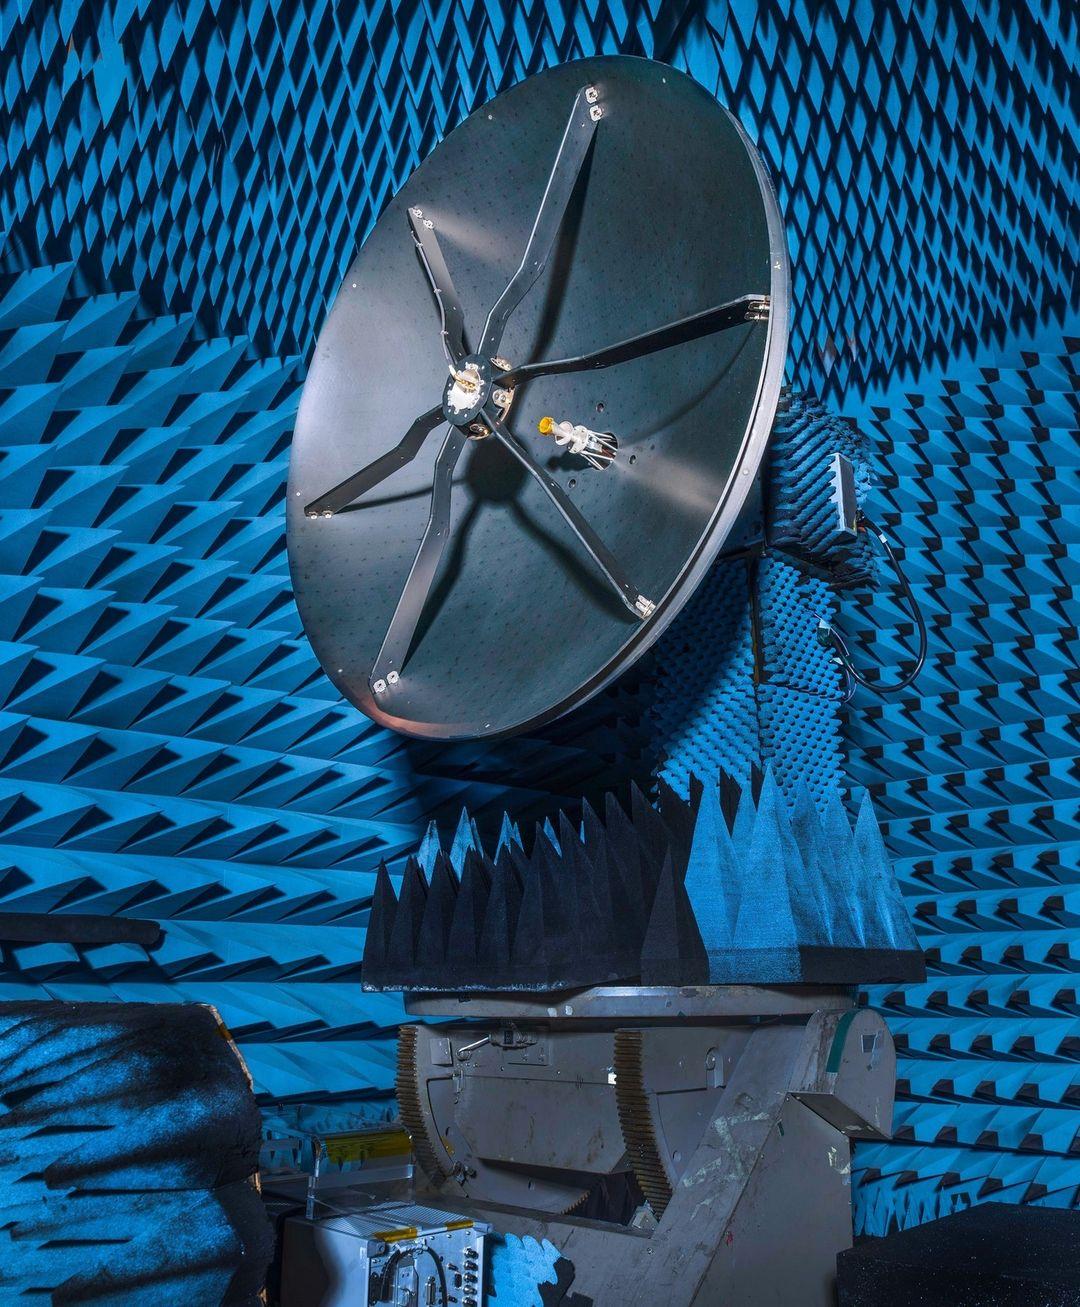 
 With a dish this big, we can stay connected even a million miles away in space! The Nancy Grace Roman Space Telescope’s high-gain antenna has completed a series of tests at NASA's Goddard Space Flight Center. 

One of those tests was in the radio-frequency anechoic test chamber, ensuring Roman’s signal will be crystal clear back here on Earth. The foam spikes lining the chamber make sure there is minimal interference during testing. 

Next steps: the antenna will be attached to its articulating boom assembly in the Goddard clean room!

Click the link in our bio to learn more about Roman’s high-gain antenna 📡

Credit: NASA/Chris Gunn

Image Description:

Image 1: Wide shot of the Nancy Grace Roman Space Telescope’s high-gain antenna inside a testing chamber that is covered in blue spiked-shaped foam. The antenna is a large grey dish, about the height of a refrigerator, facing slightly to the left. There is a small circle that is elevated in the middle of the antenna disk by six metal strips. 
The antenna is mounted to a base that is also covered in blue spikes. 

Image 2:Close-up of the Nancy Grace Roman Space Telescope’s high-gain antenna inside a testing chamber that is covered in blue spiked-shaped foam. The antenna is a large grey dish, about the height of a refrigerator, facing slightly to the right. There is a small circle that is elevated in the middle of the antenna disk by six metal strips.
There are small faint black circles that cover the disk. 

Image 3:Close-up of the spiked-shaped blue foam covering the walls of the chamber. 
 